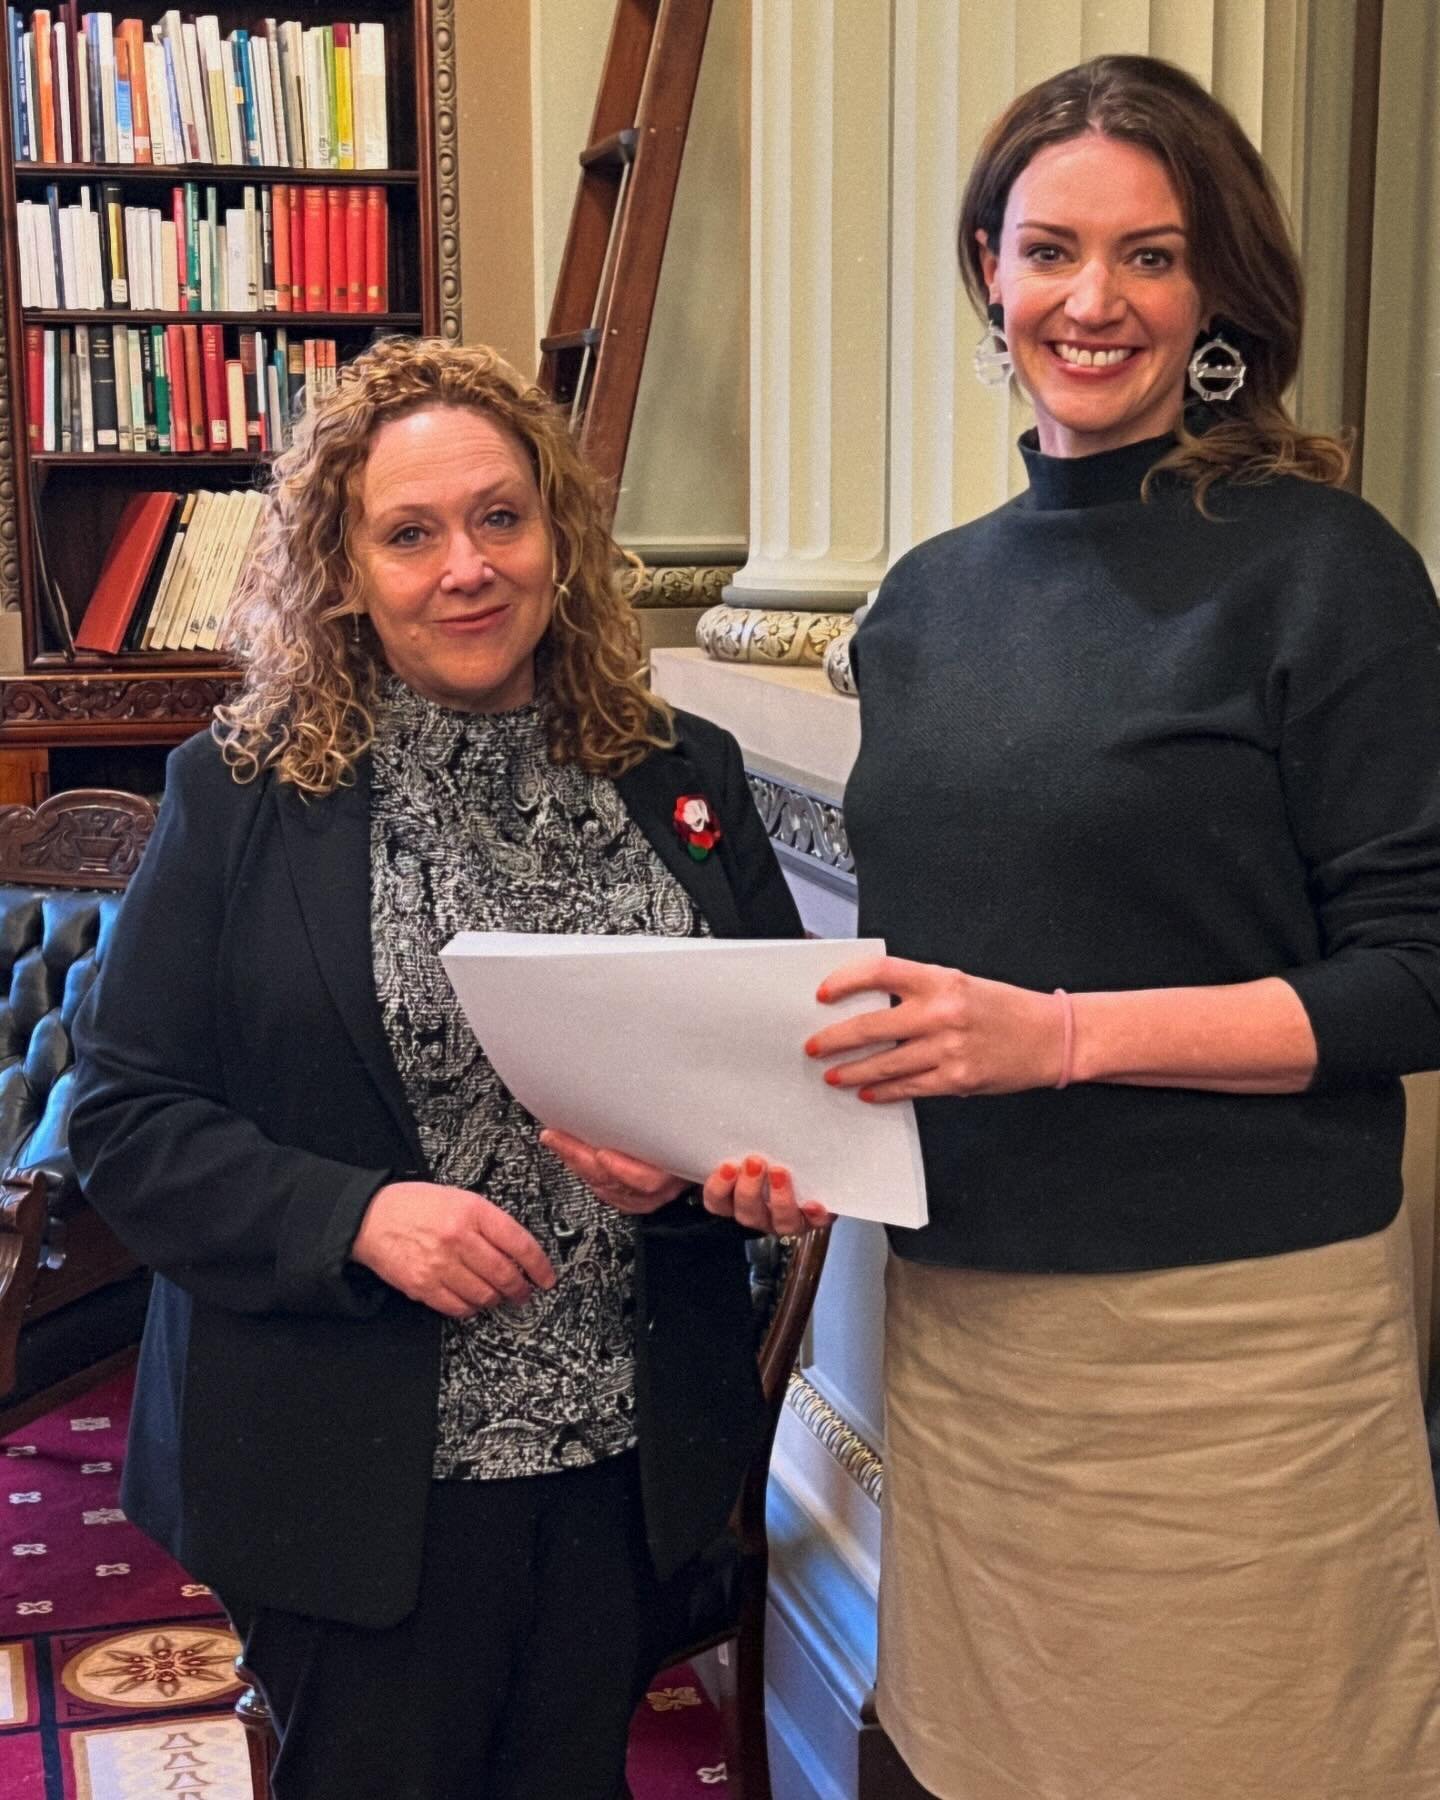 This morning I presented Roads Minister @melissaforwilliamstown our petition for truck enforcement cameras for when the Westgate Tunnel opens.

To secure this, we need legislative changes through the Victorian Parliament and funding. 

The monitoring